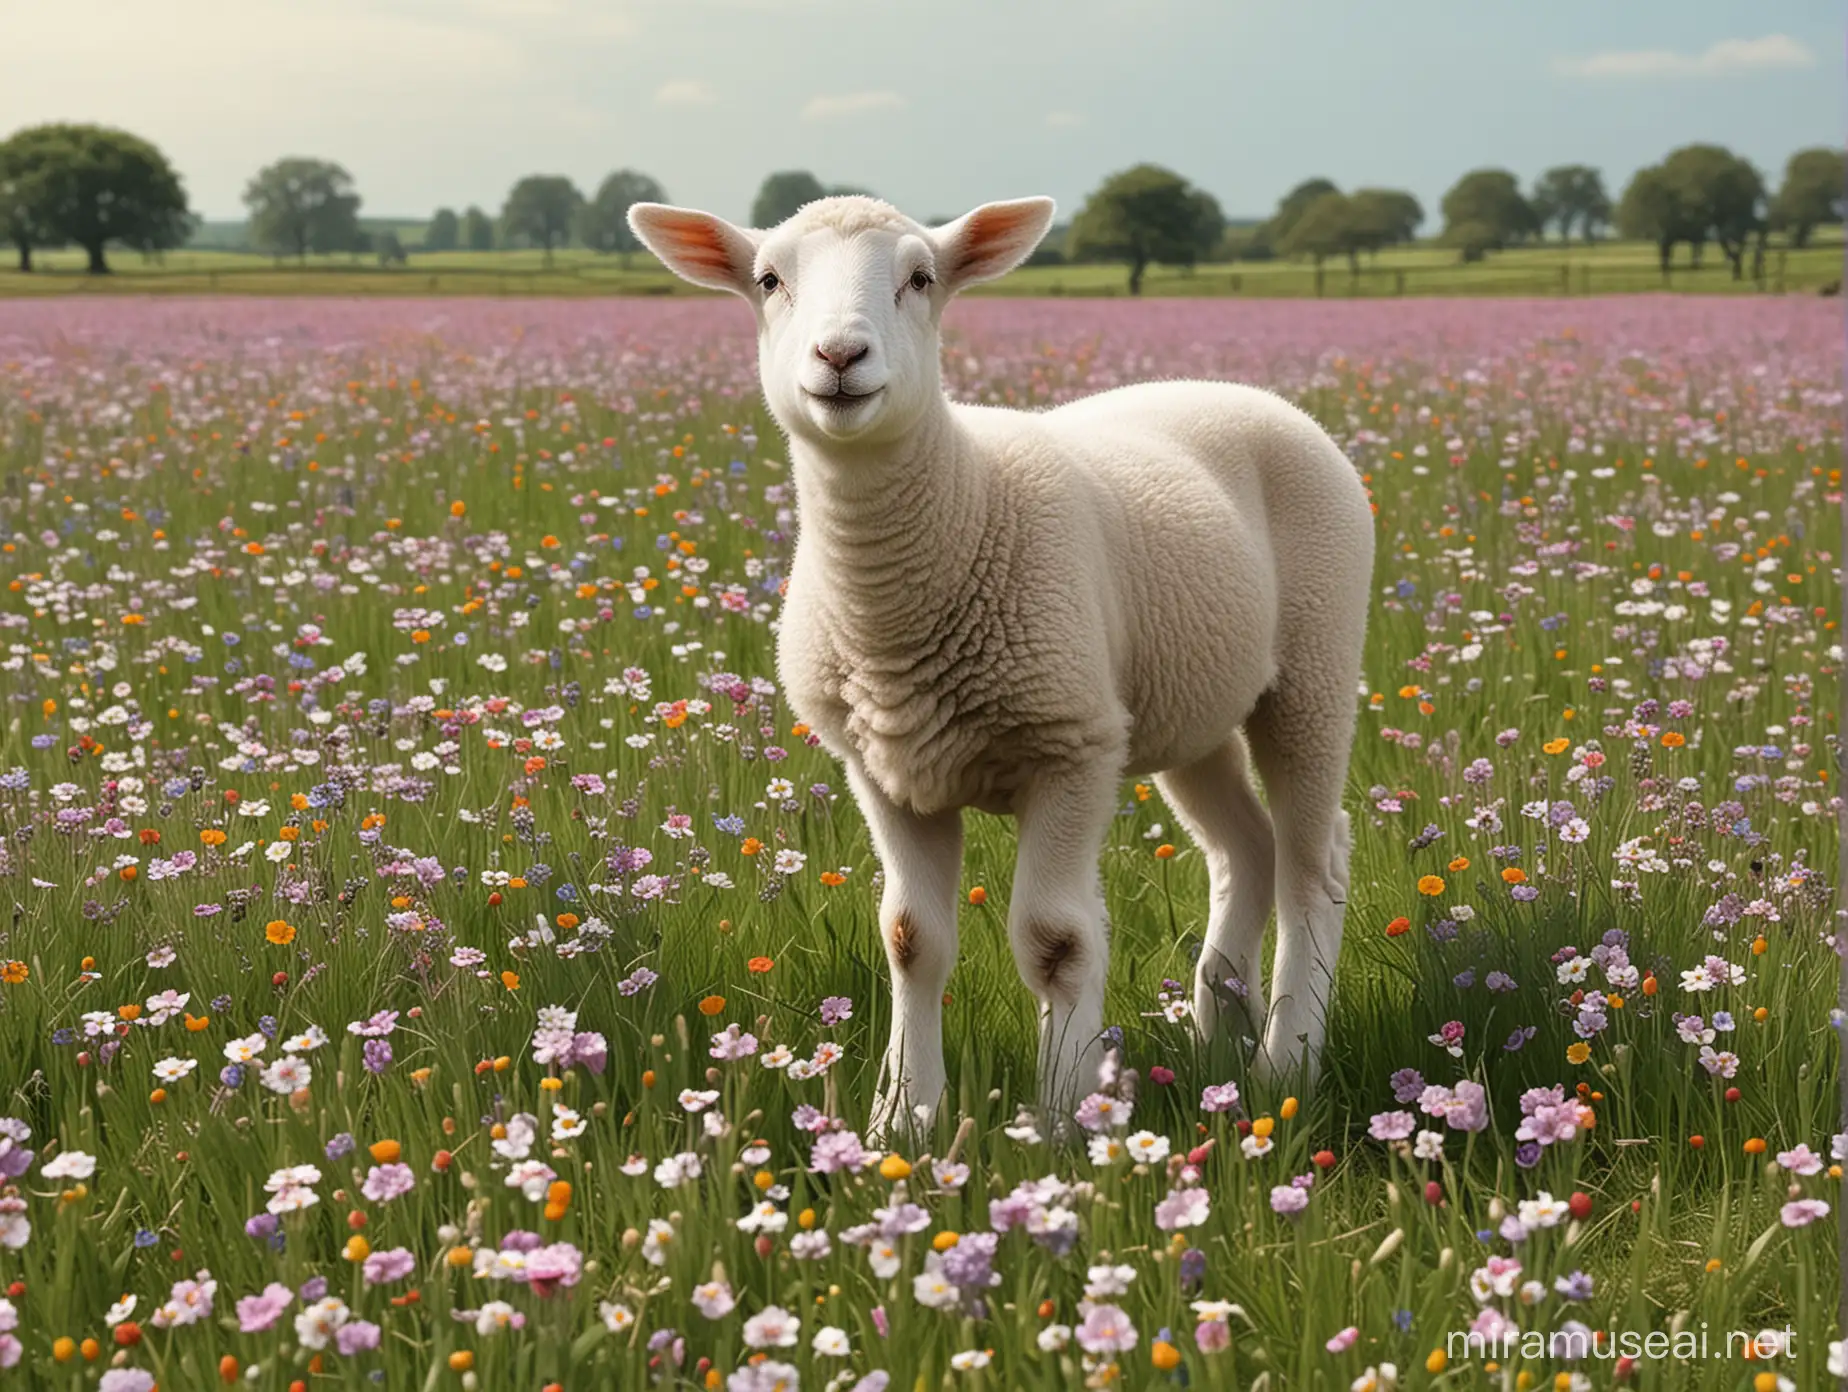 Spring Meadow Playful Lambs Frolicking Among Vibrant Wildflowers